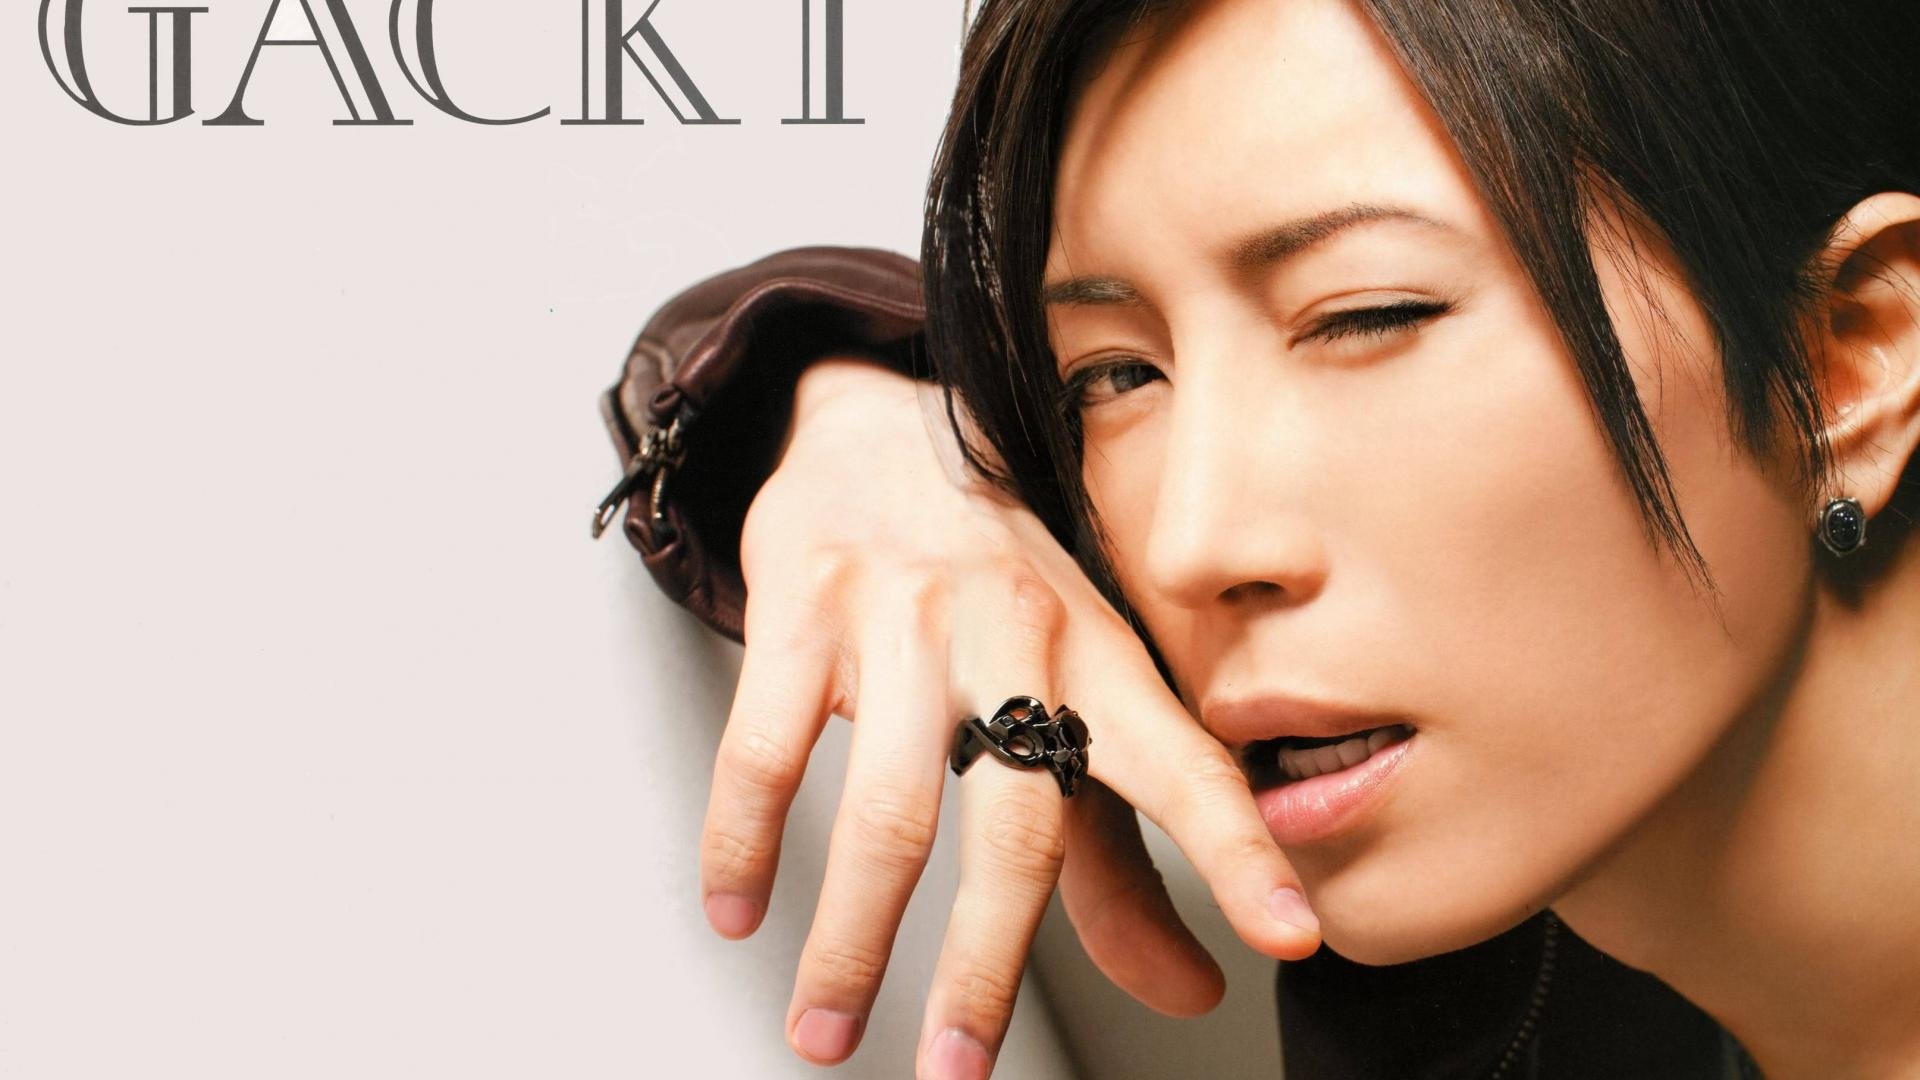 Awesome Gackt free wallpaper ID:271982 for hd 1920x1080 computer